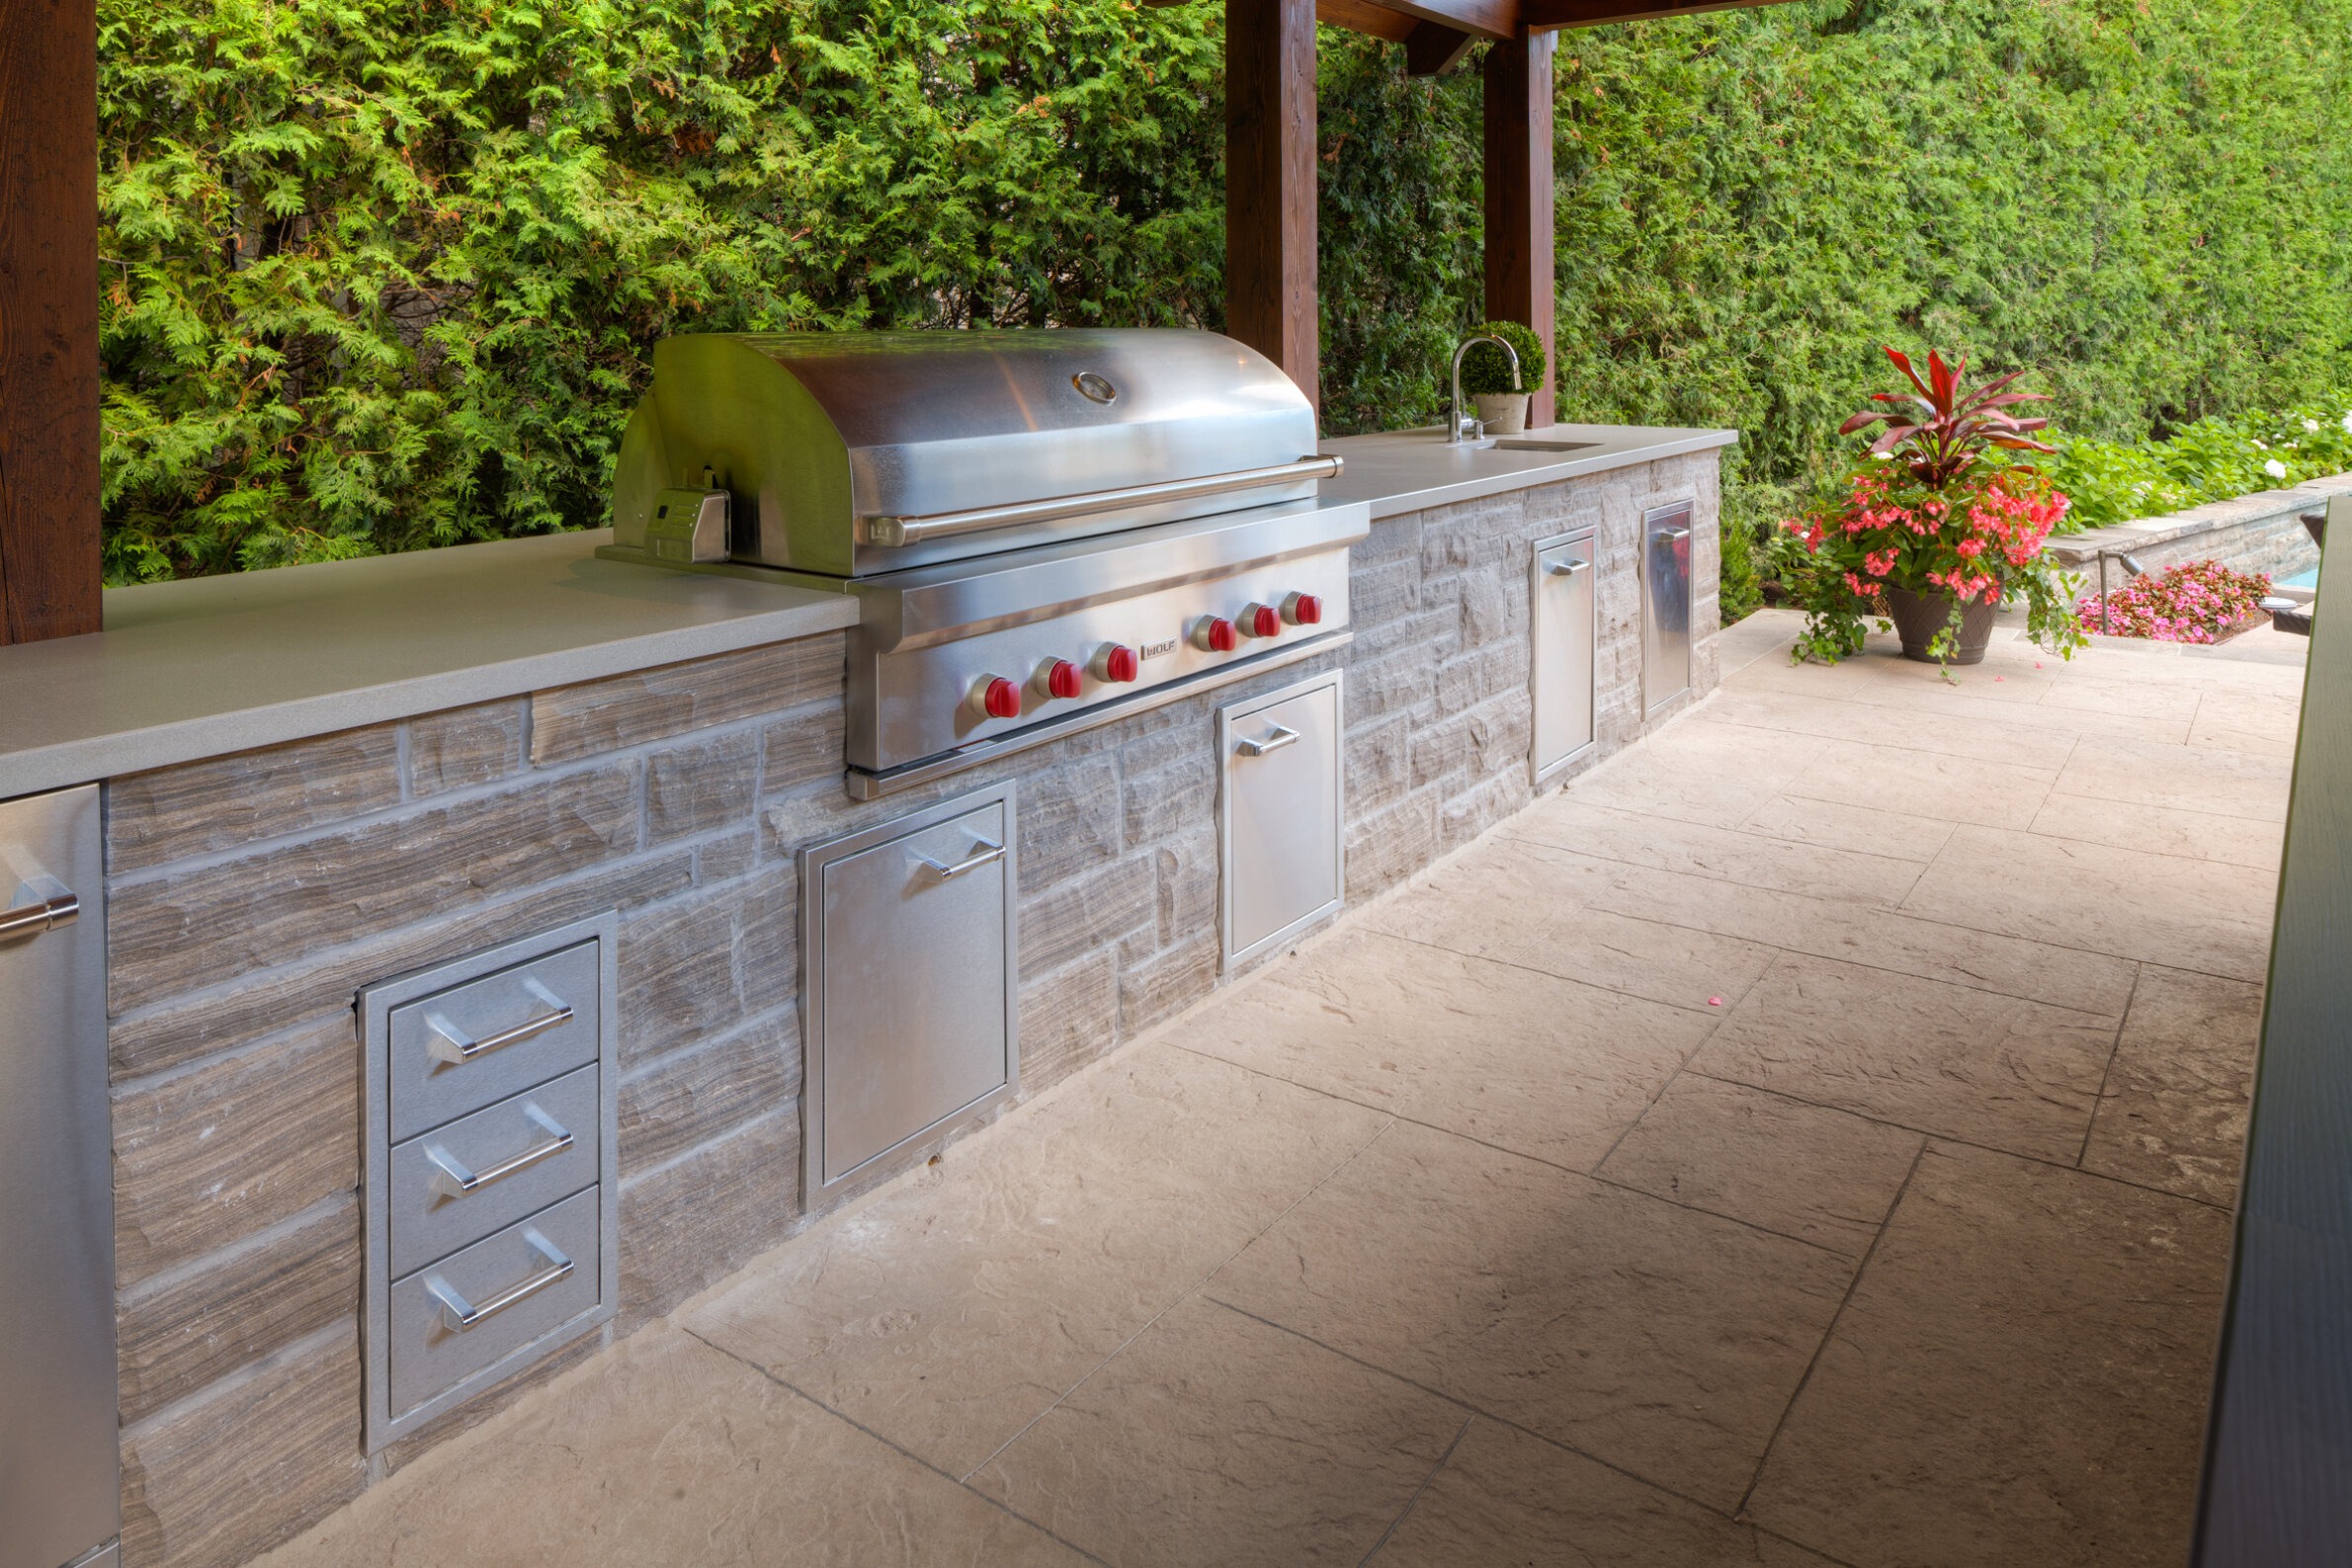 An outdoor kitchen with a stainless steel barbecue grill, storage drawers, a sink, and a counter set against a lush green backdrop and tiled floor.